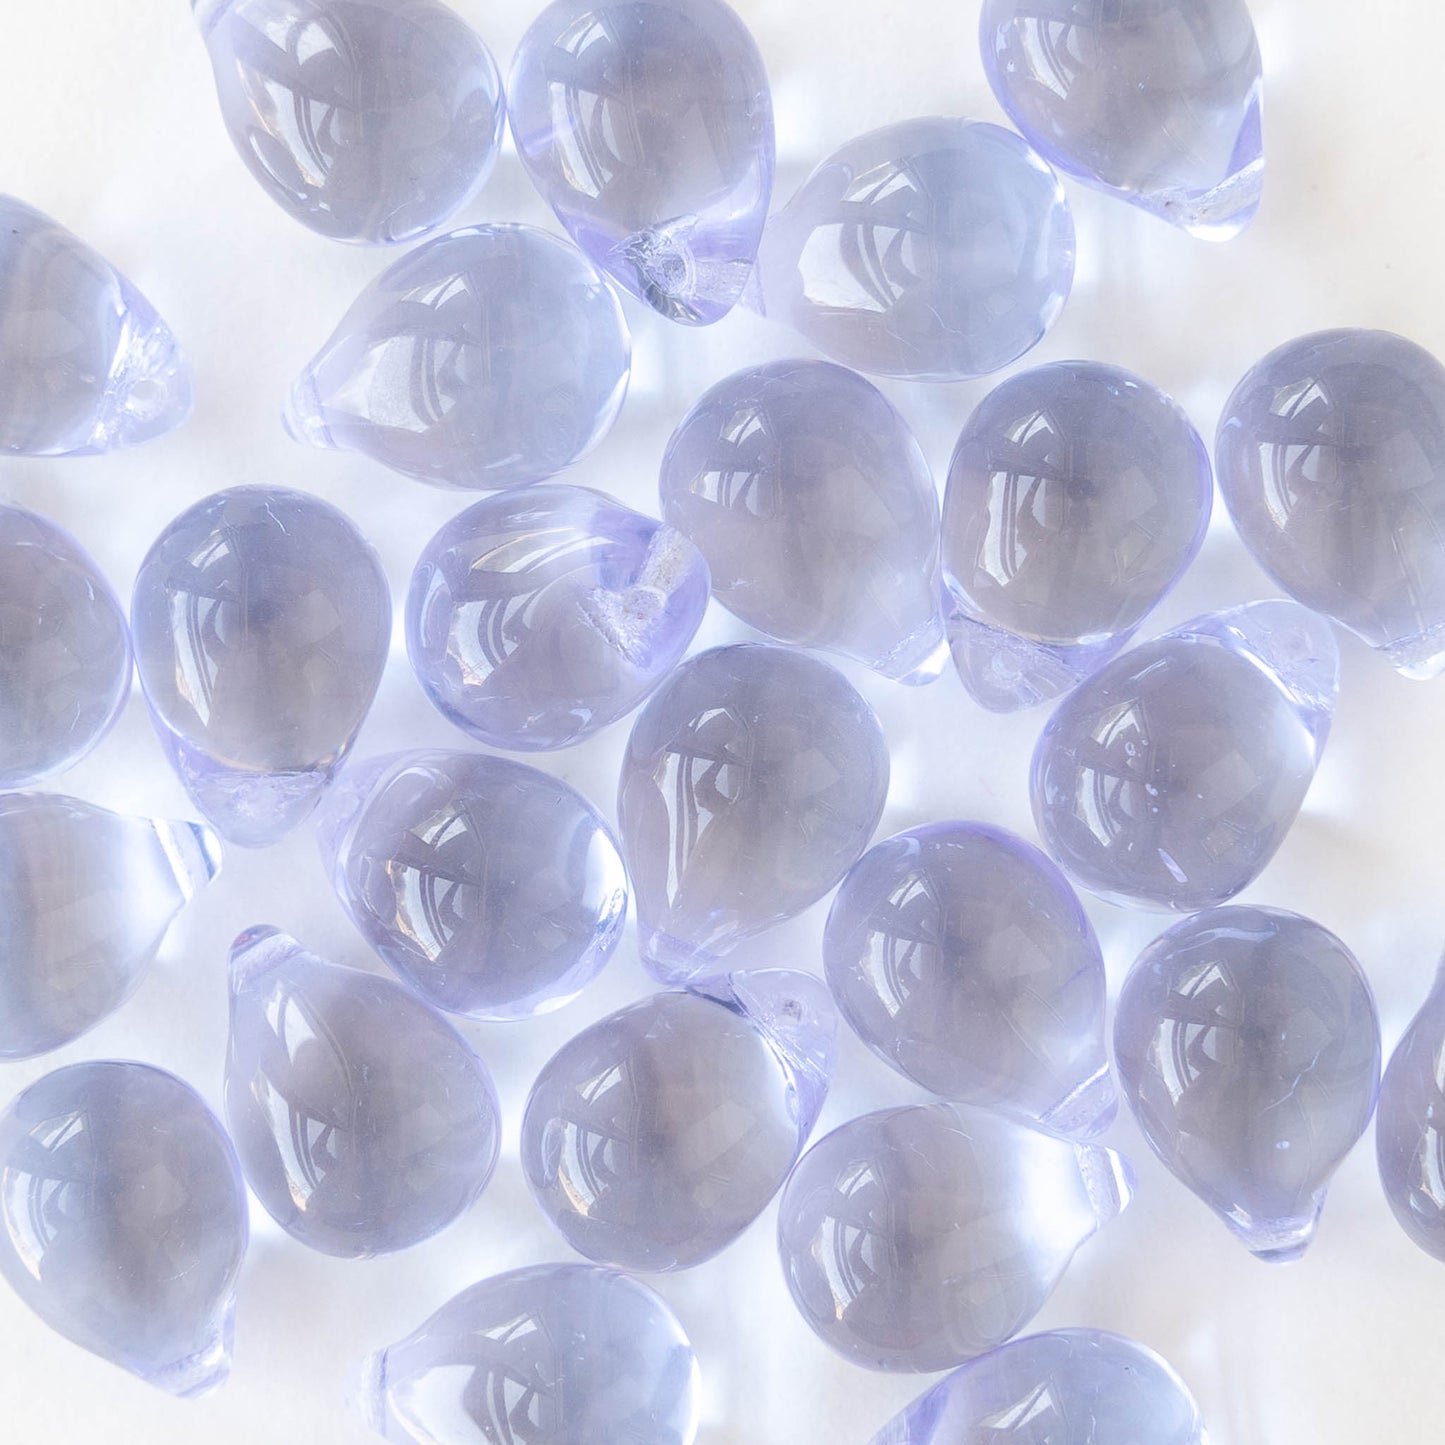 Load image into Gallery viewer, 10x14mm Glass Teardrop Beads - Light Blue Lilac - 12, 24 or 48
